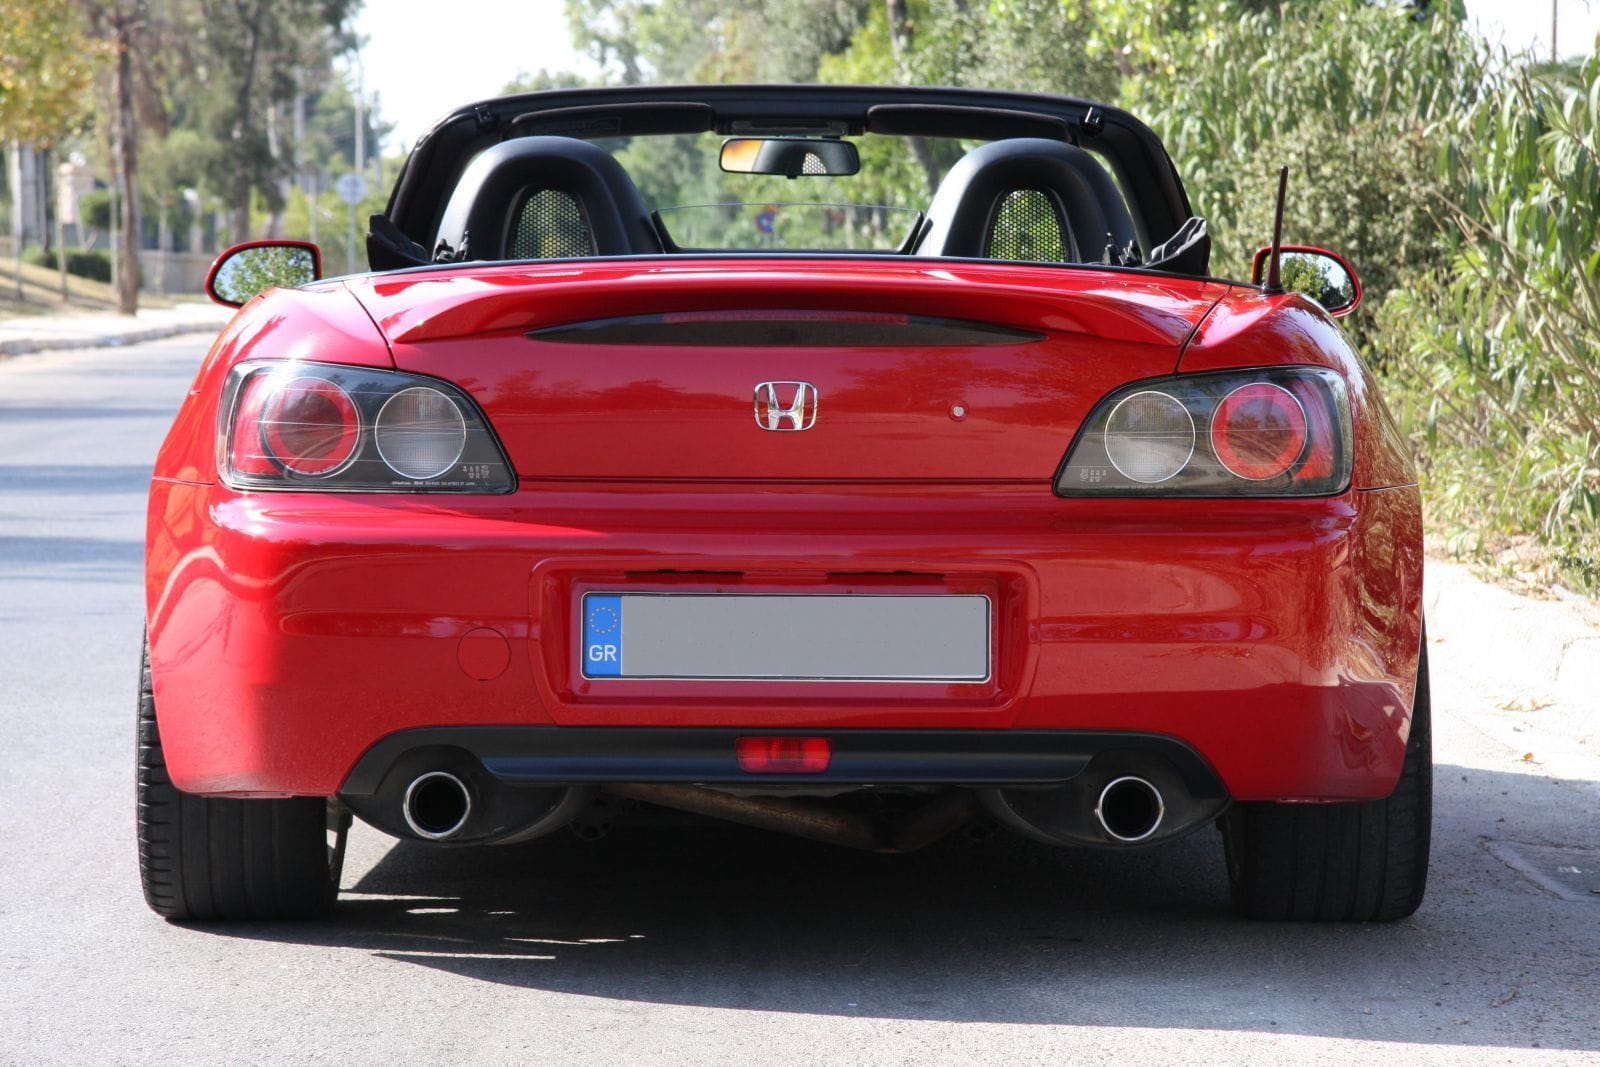 Honda S2000: One of the Best Exhaust Notes